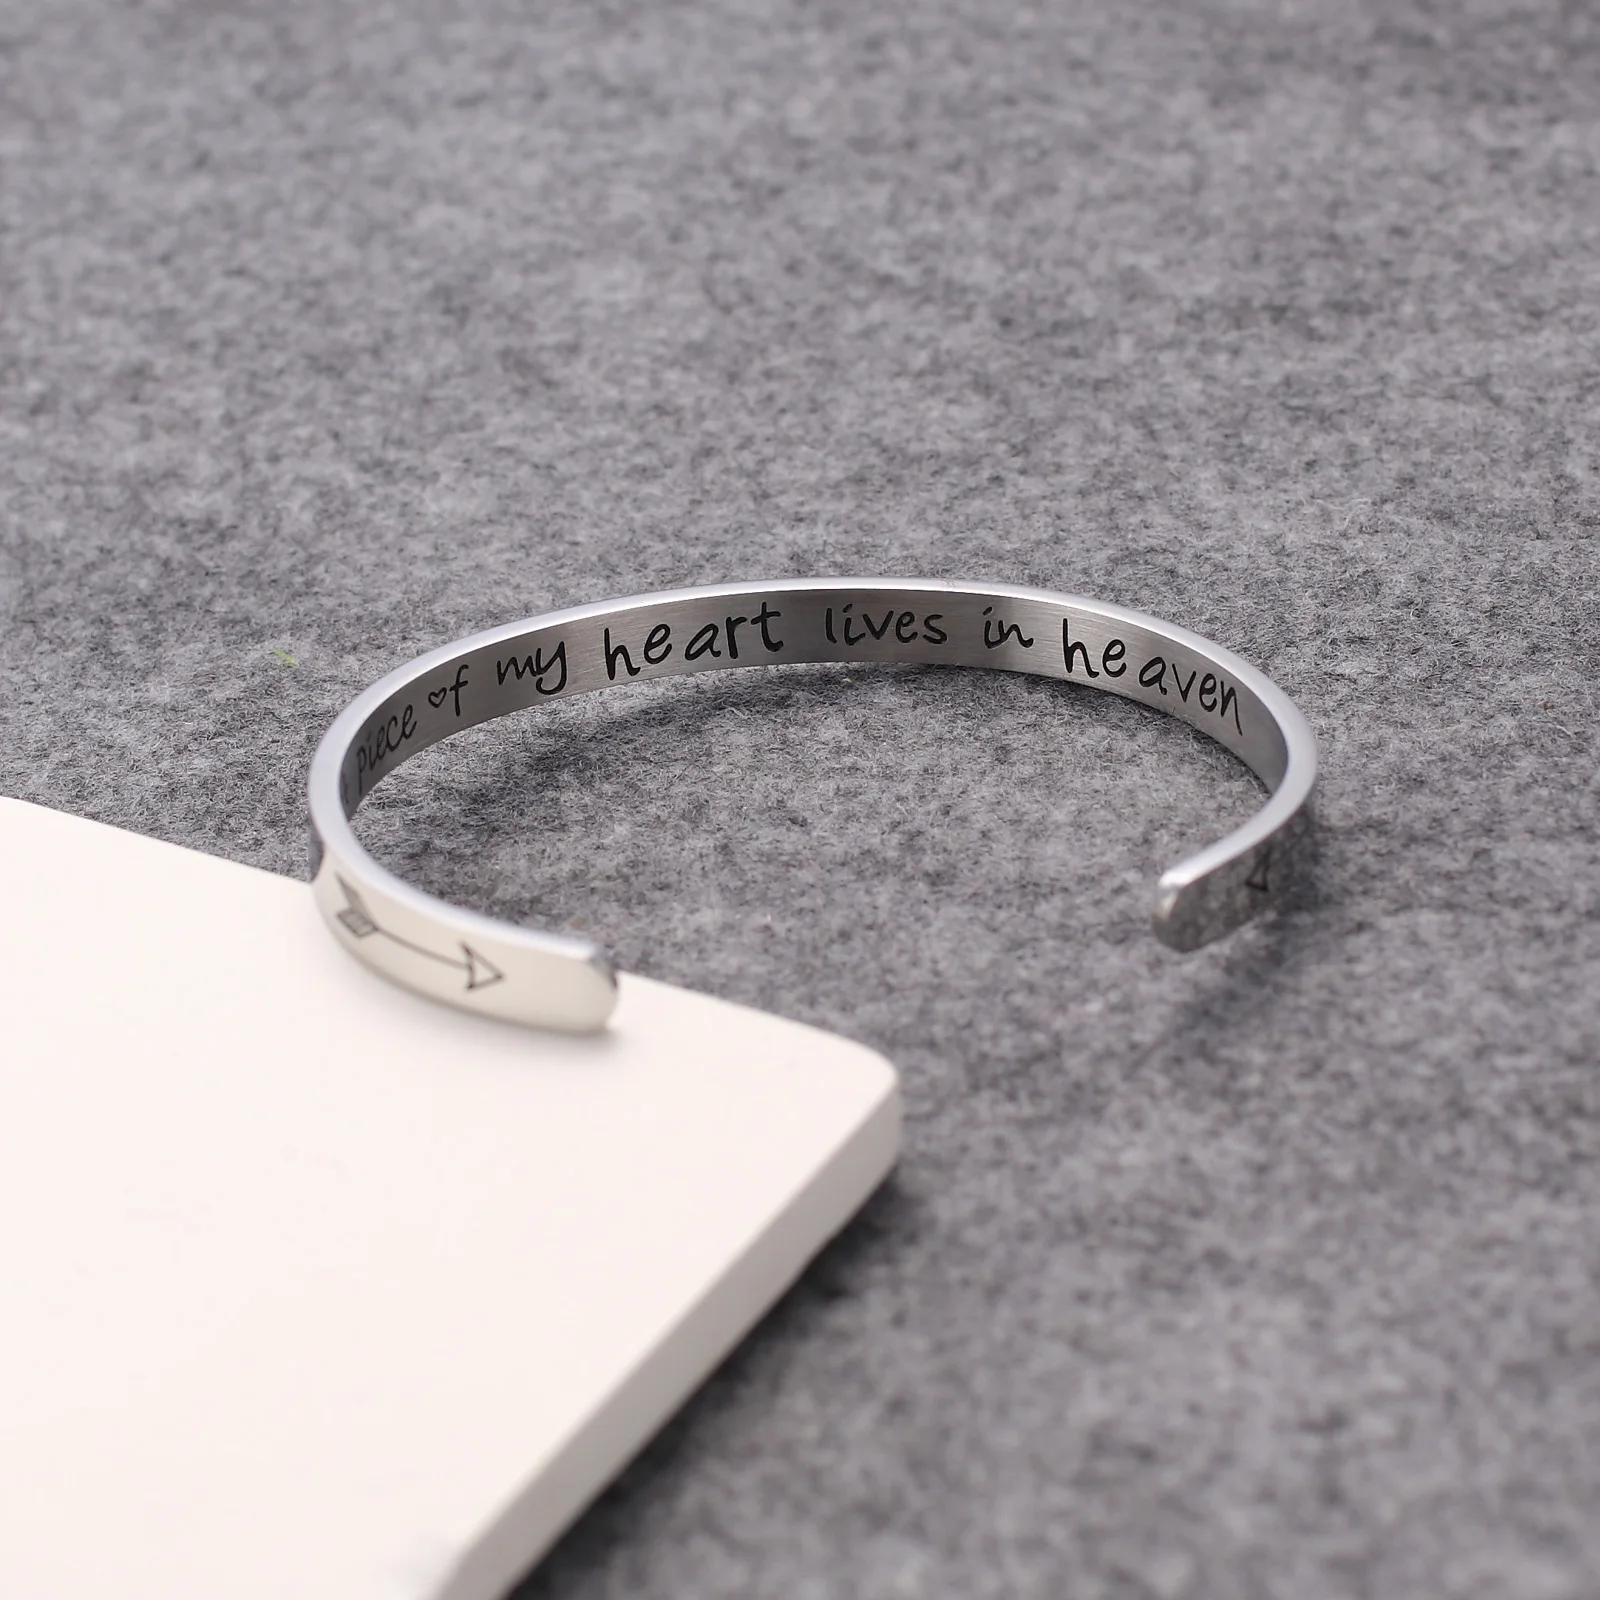 

Memorial Jewelry A Piece of My Heart Lives in Heaven Bracelet Stainless Steel Engraved Cuff Bracelet Bangle Remember a Loved One